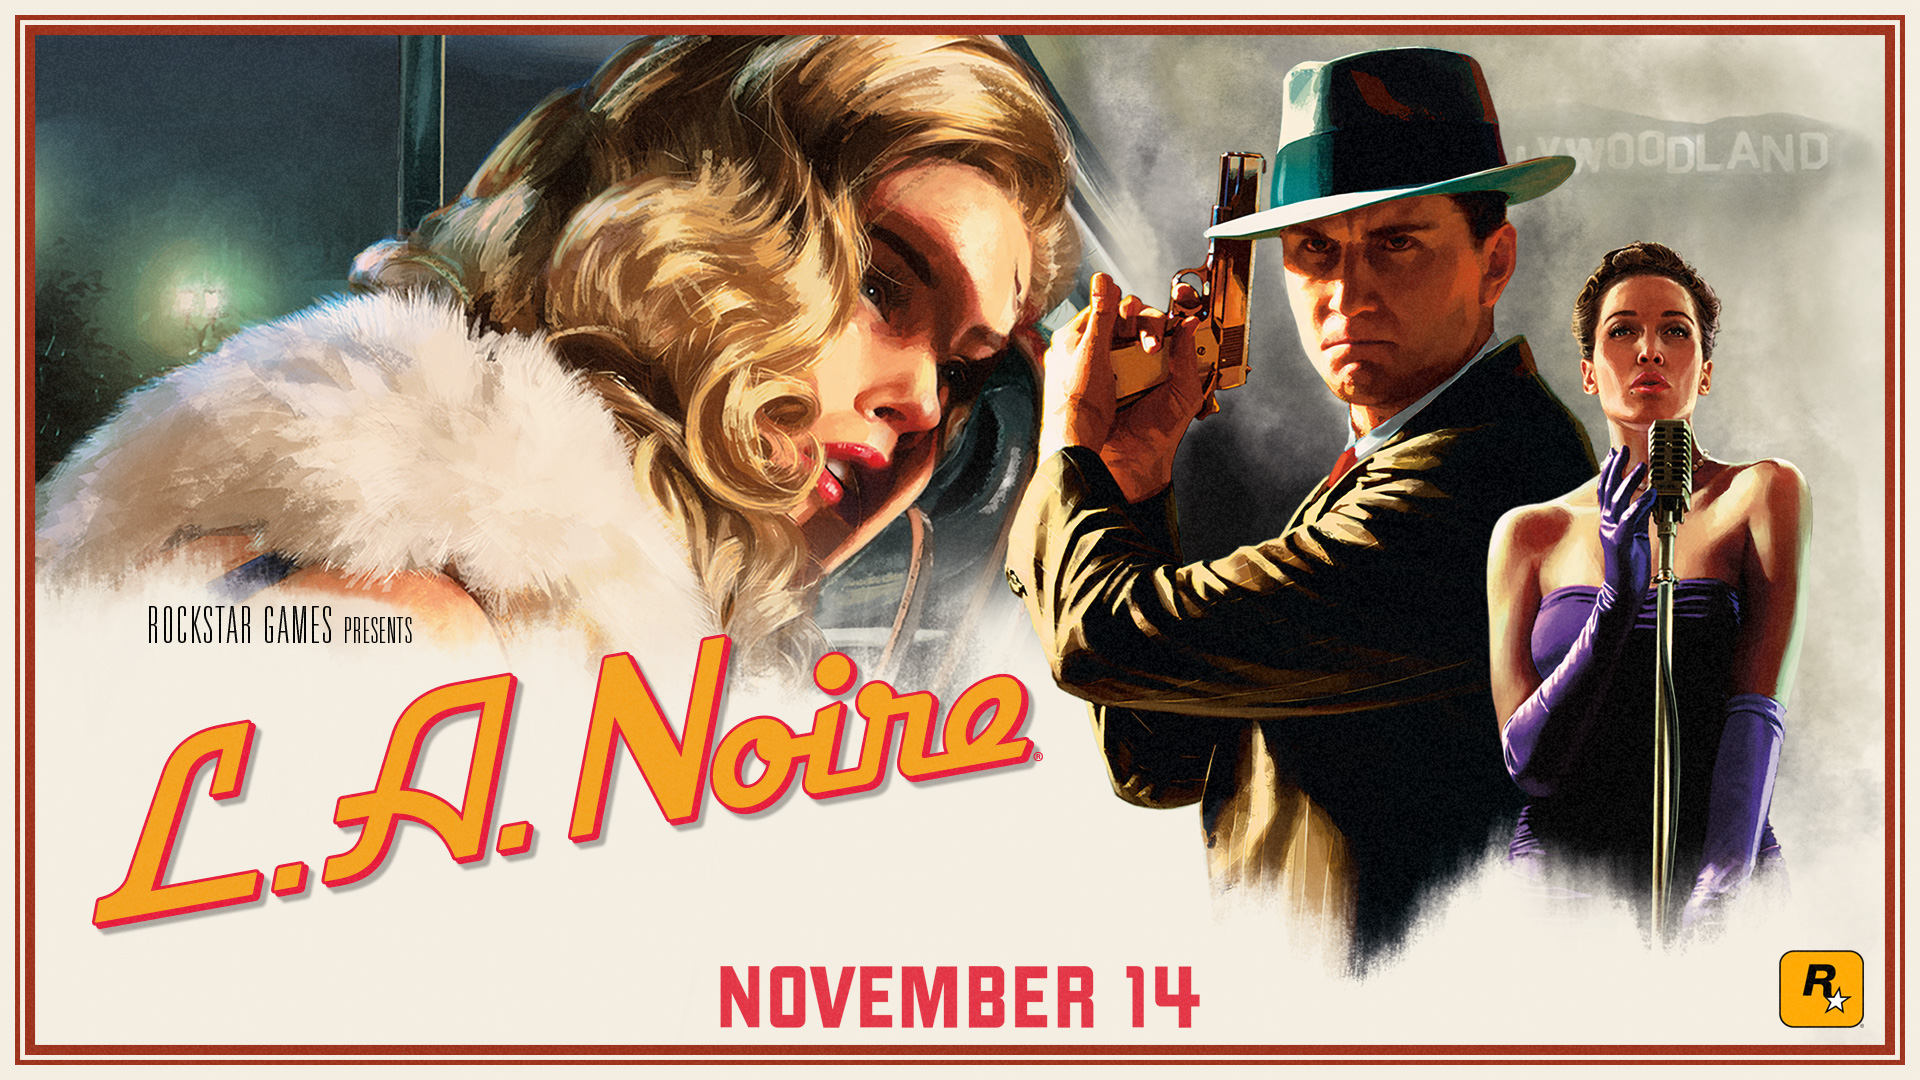 L.A. Noire port announced for the Nintendo Switch, PS4, and Xbox One